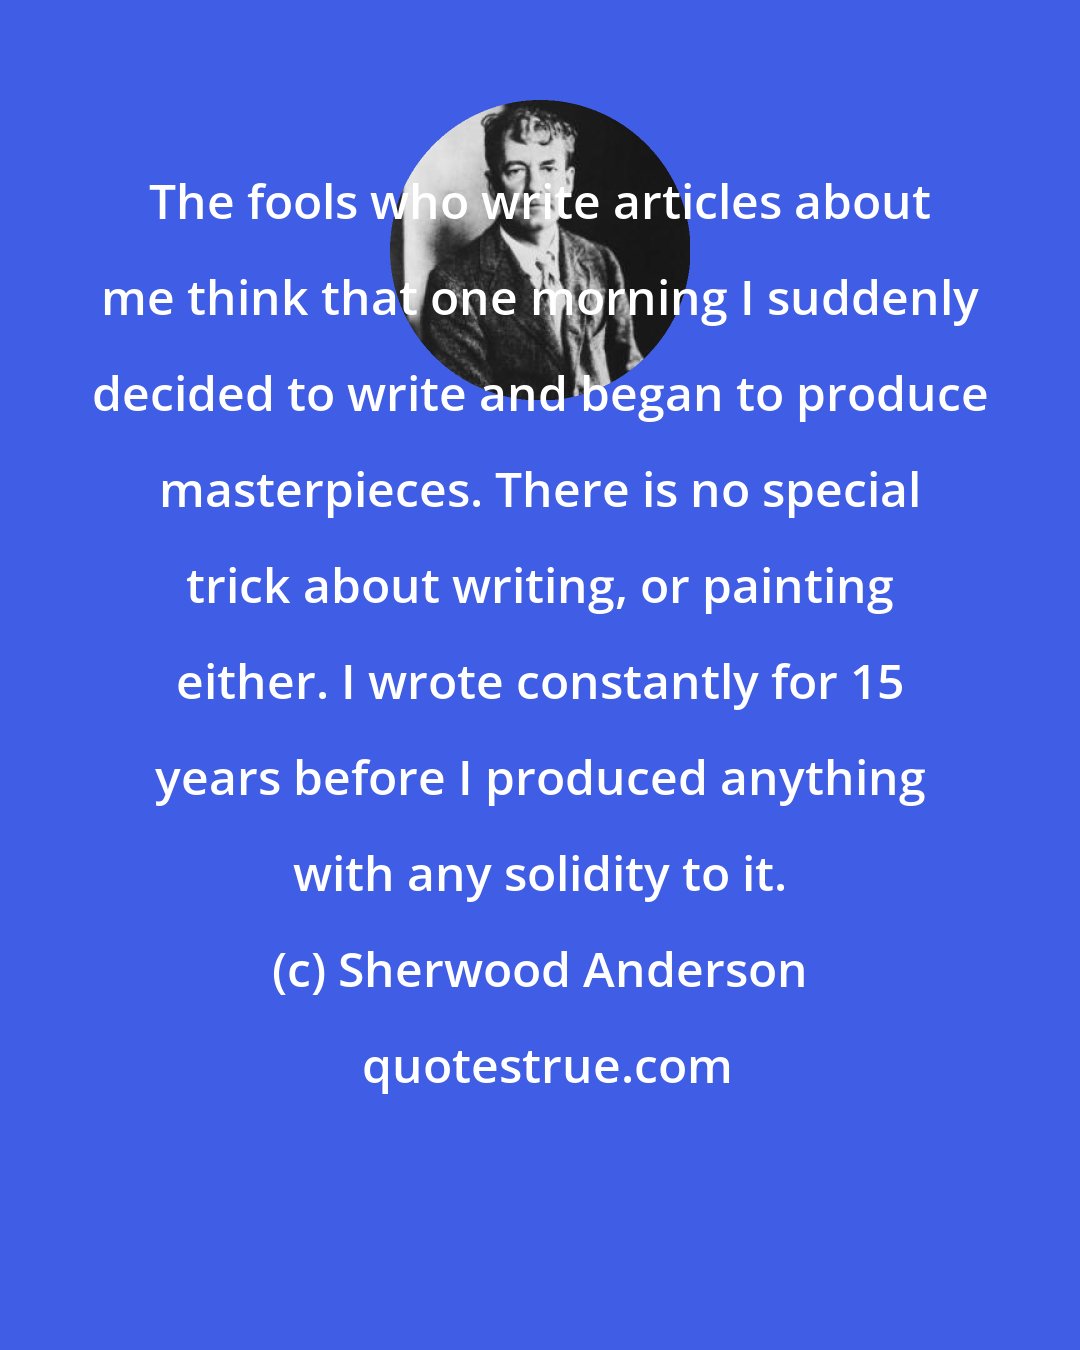 Sherwood Anderson: The fools who write articles about me think that one morning I suddenly decided to write and began to produce masterpieces. There is no special trick about writing, or painting either. I wrote constantly for 15 years before I produced anything with any solidity to it.